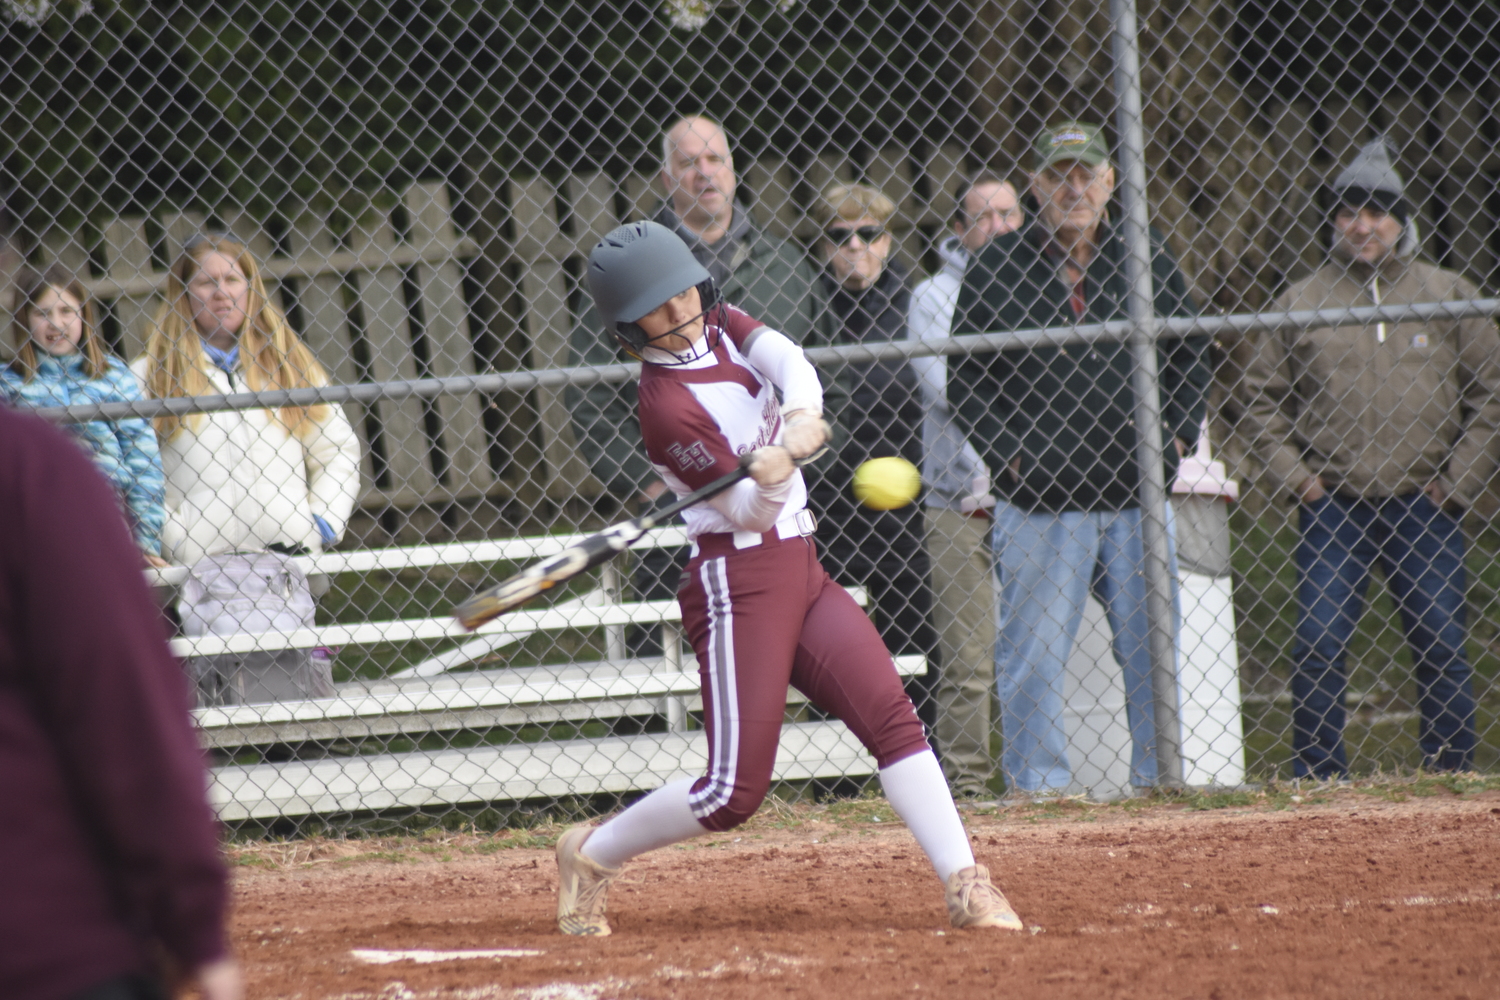 East Hampton sophomore Brynley Lys has a pitch lined up in her sights. DREW BUDD